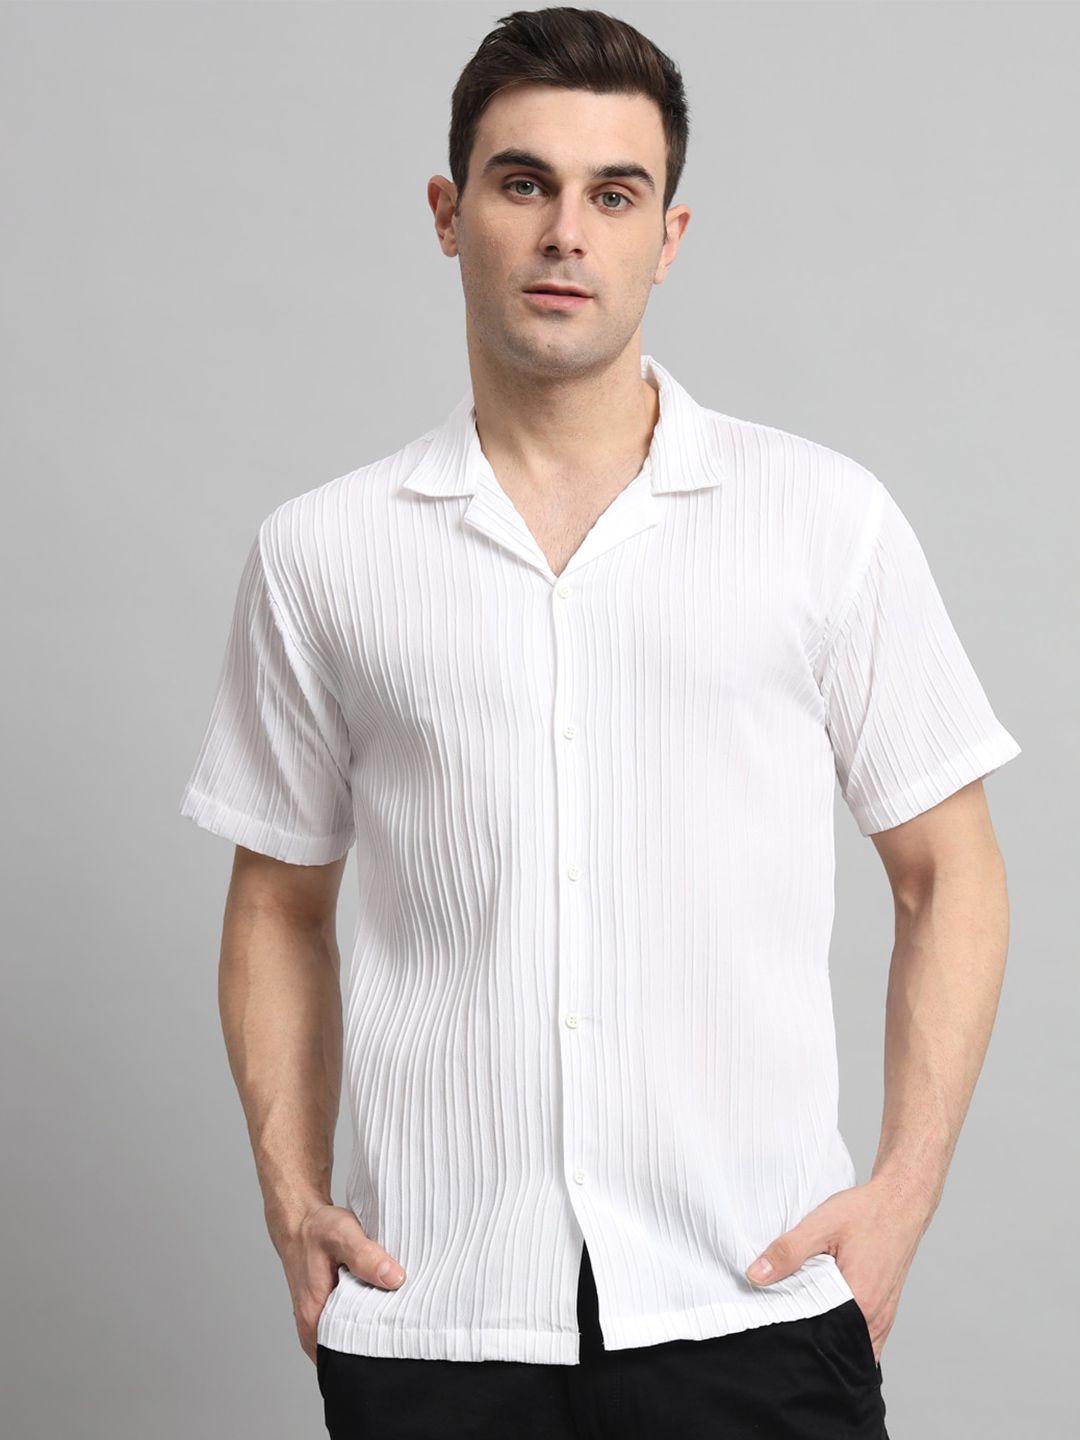 wuxi-classic-striped-spread-collar-short-sleeves-casual-shirt